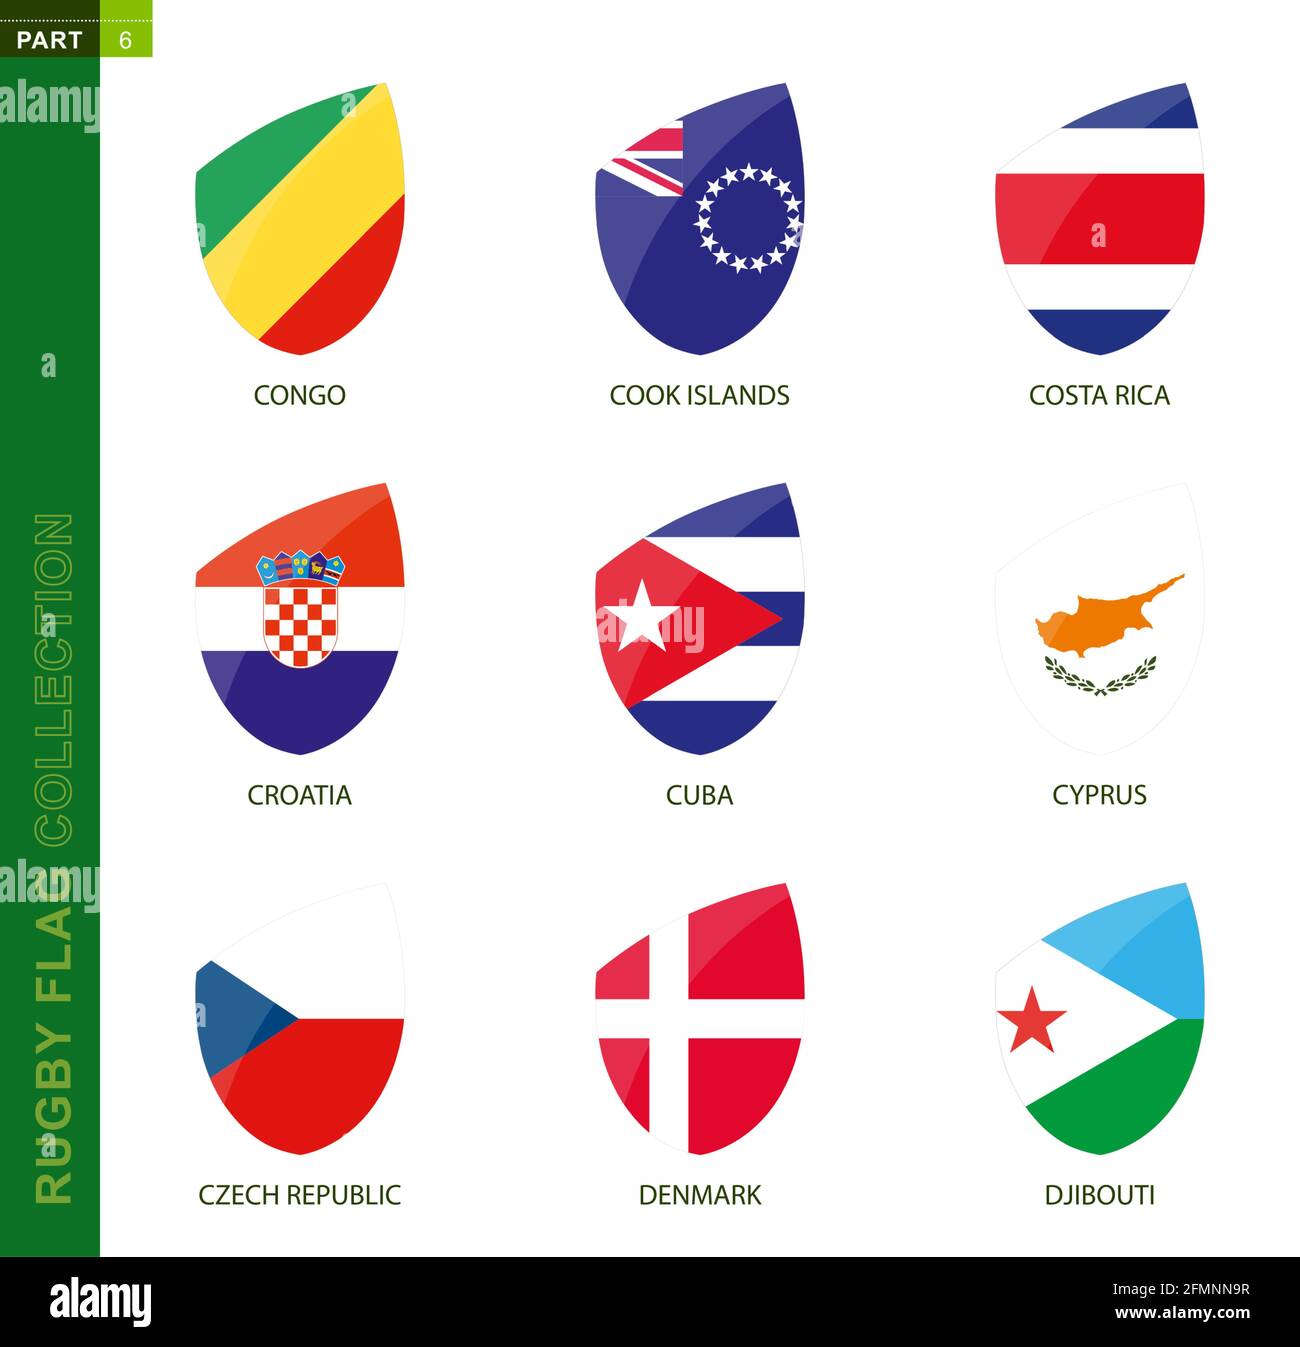 Rugby flag collection. Rugby icon with flag of 9 countries: Congo, Cook Islands, Costa Rica, Croatia, Cuba, Cyprus, Czech Republic, Denmark, Djibouti Stock Vector